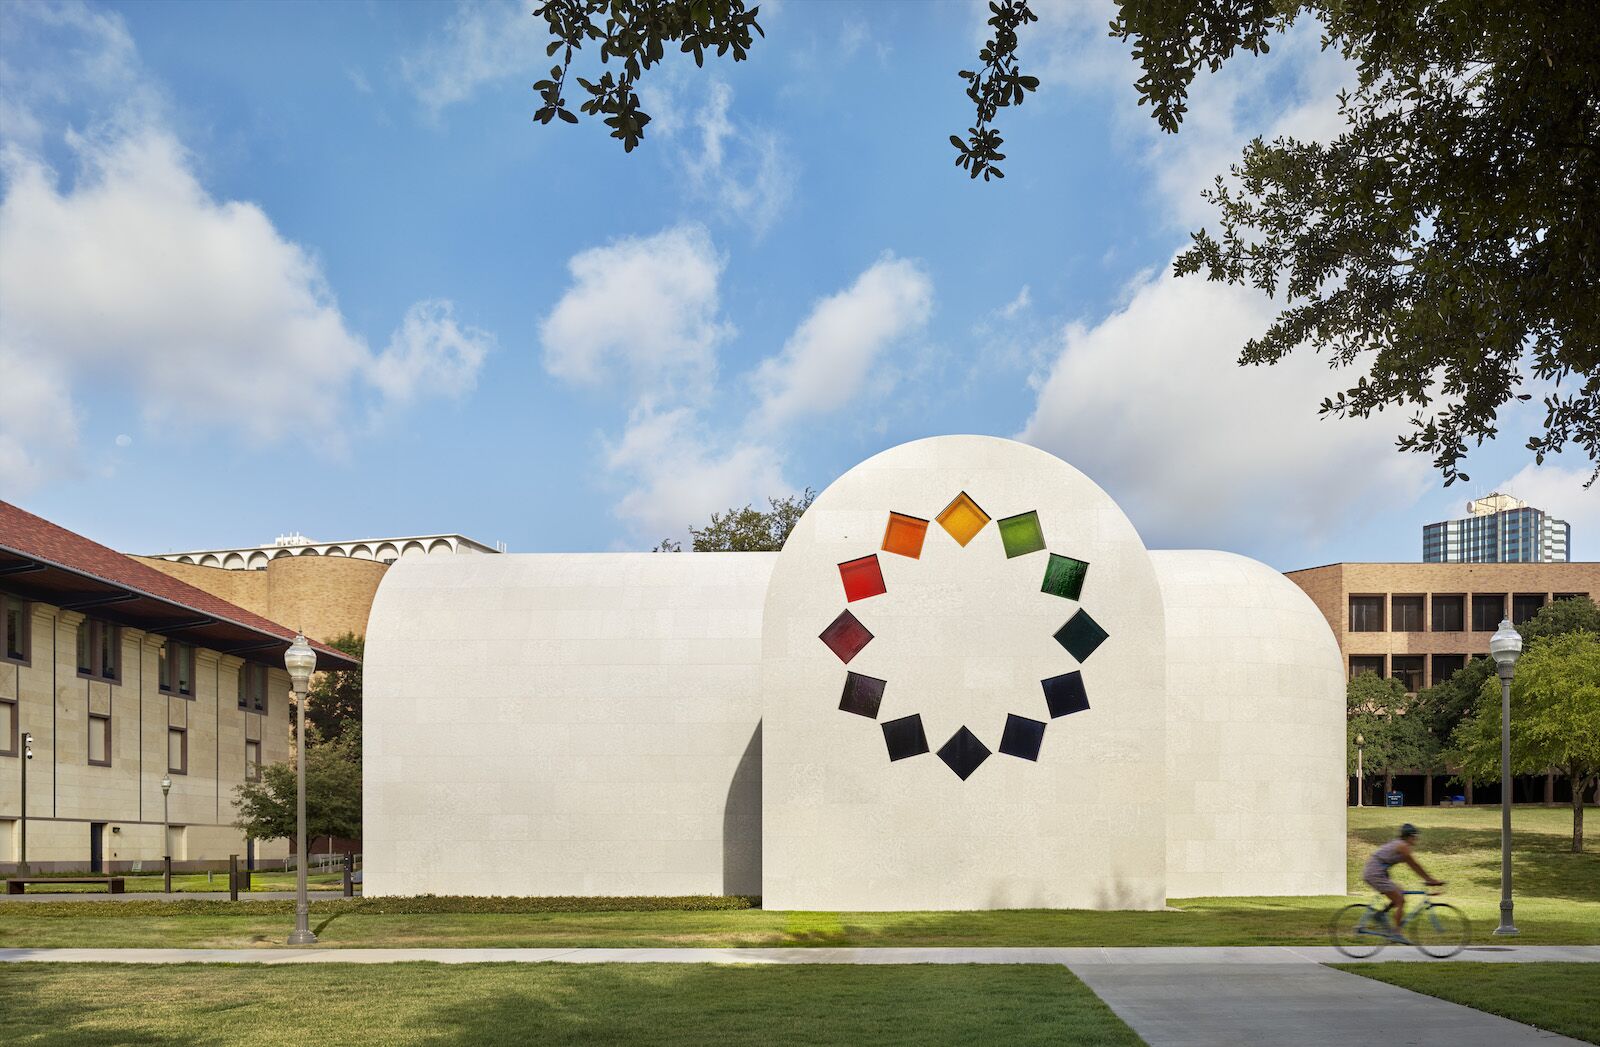 Museums in Austin: The Blanton Museum of Art